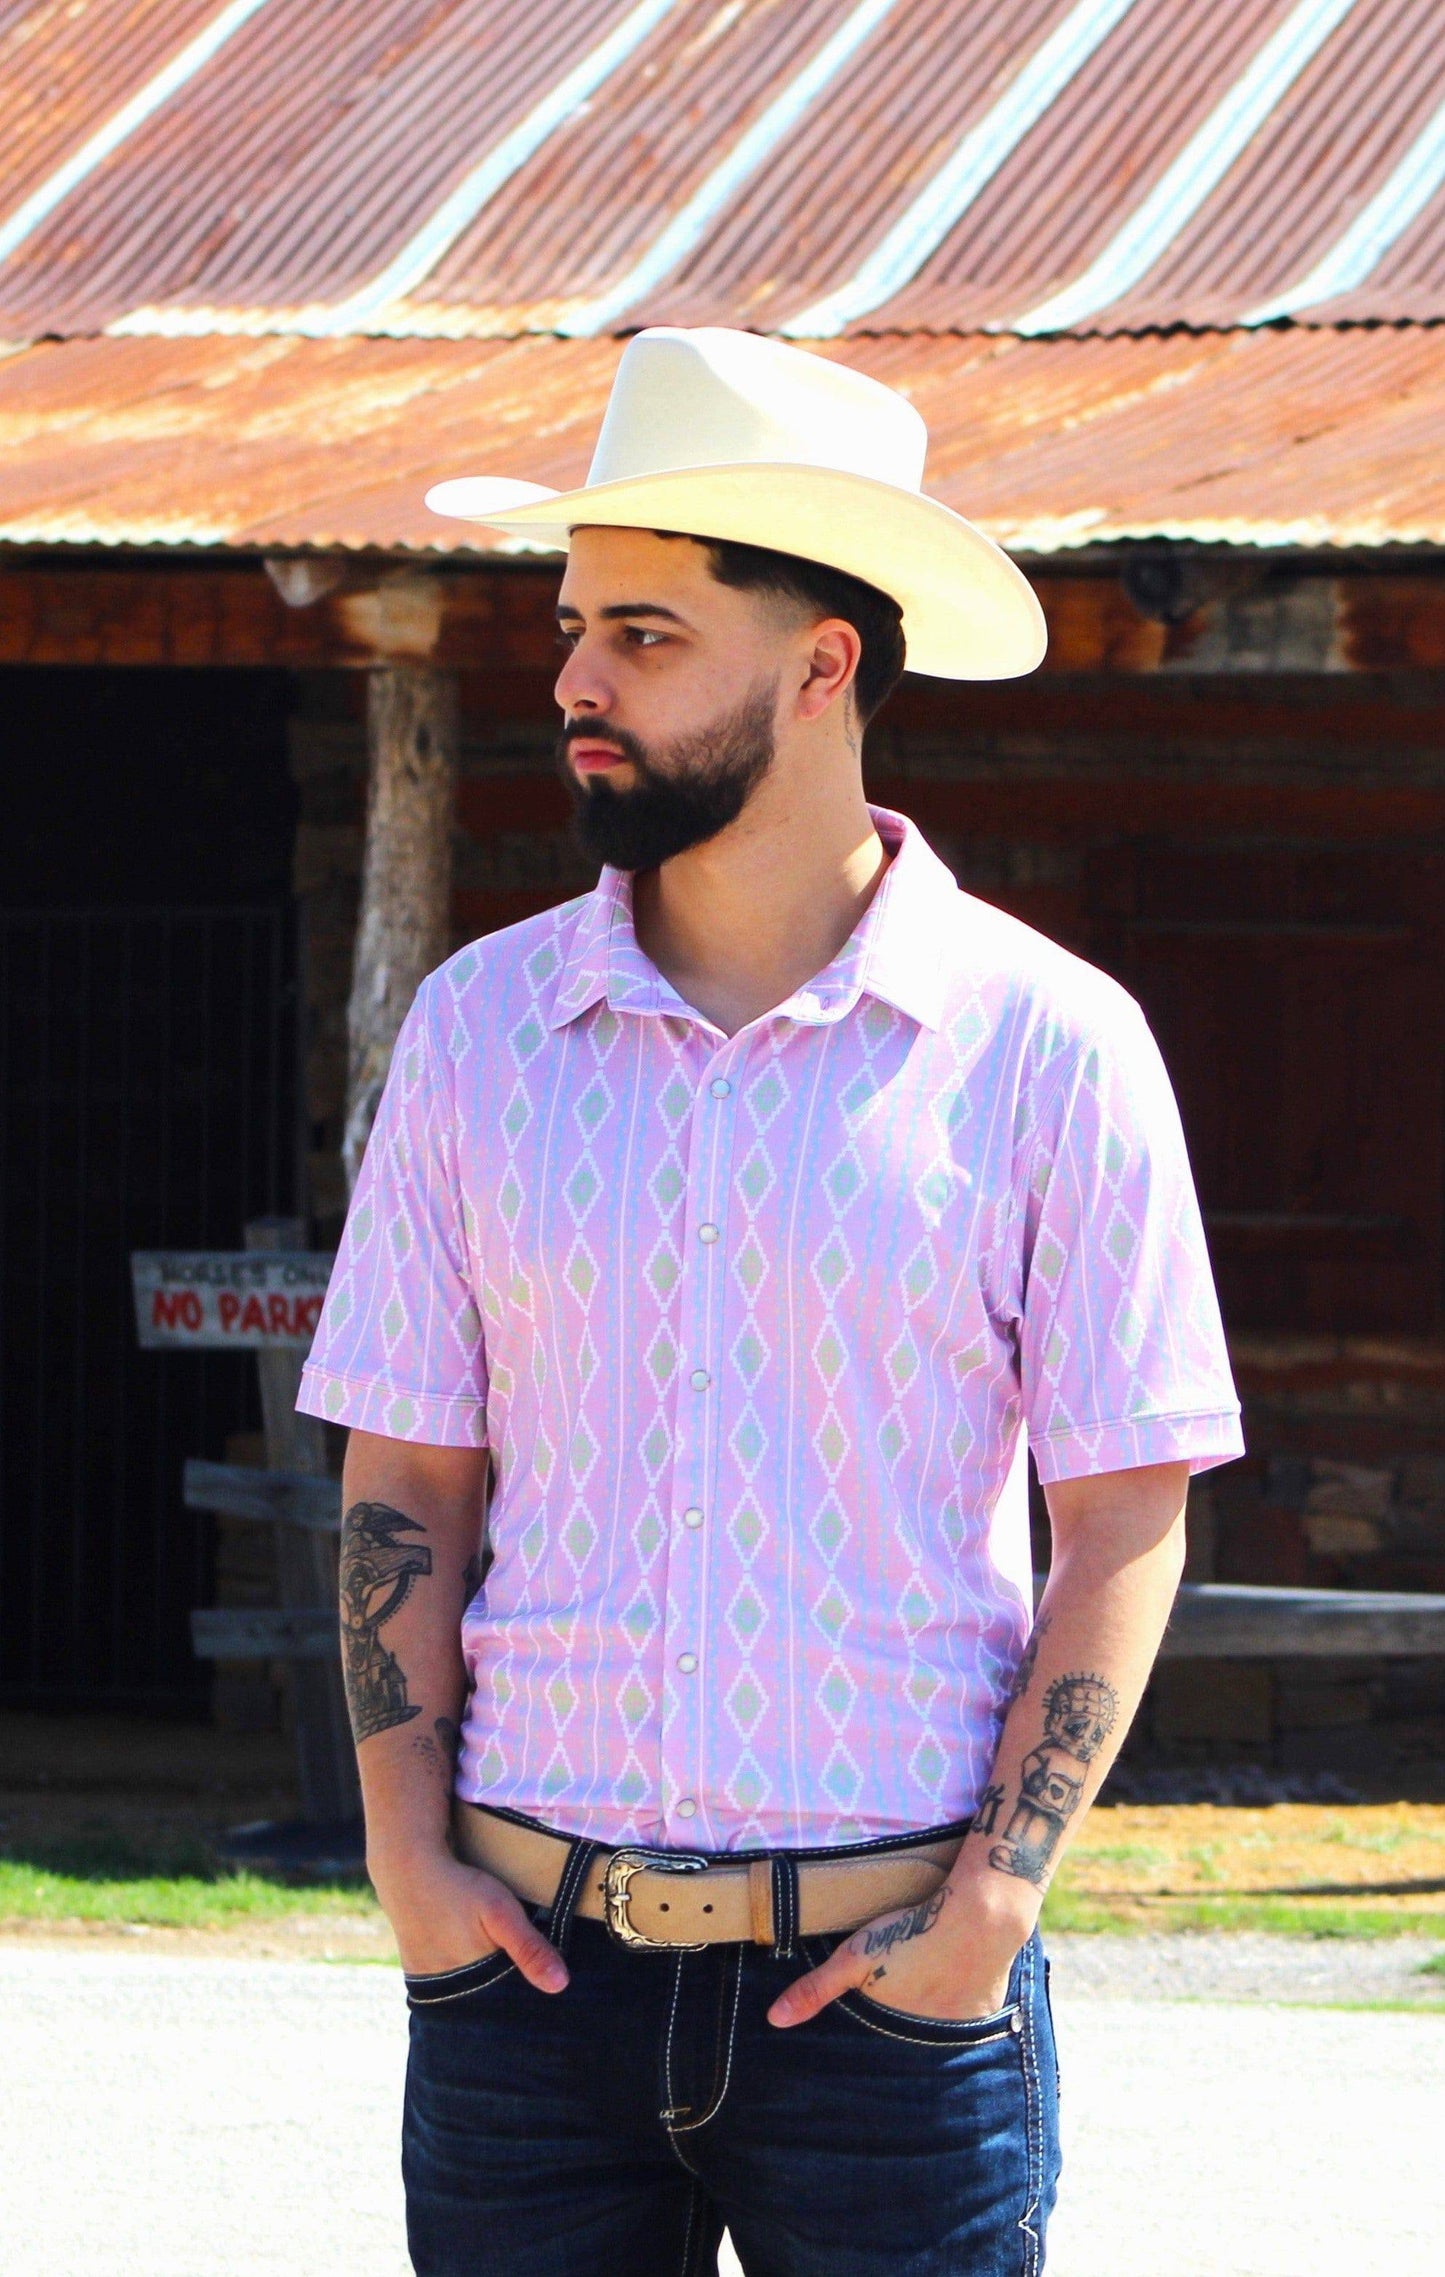 A man stands poised outdoors, sporting the Rose Quetzal shirt from HowdyHo, distinguished by its pink vertical stripes and diamond-shaped motifs. The shirt is styled with a classic collar and the sleeves are neatly cuffed, paired with a stylish beige cowboy hat, dark blue jeans, and a black leather belt. His confident stance and the rustic barn in the background create an authentic Western vibe.